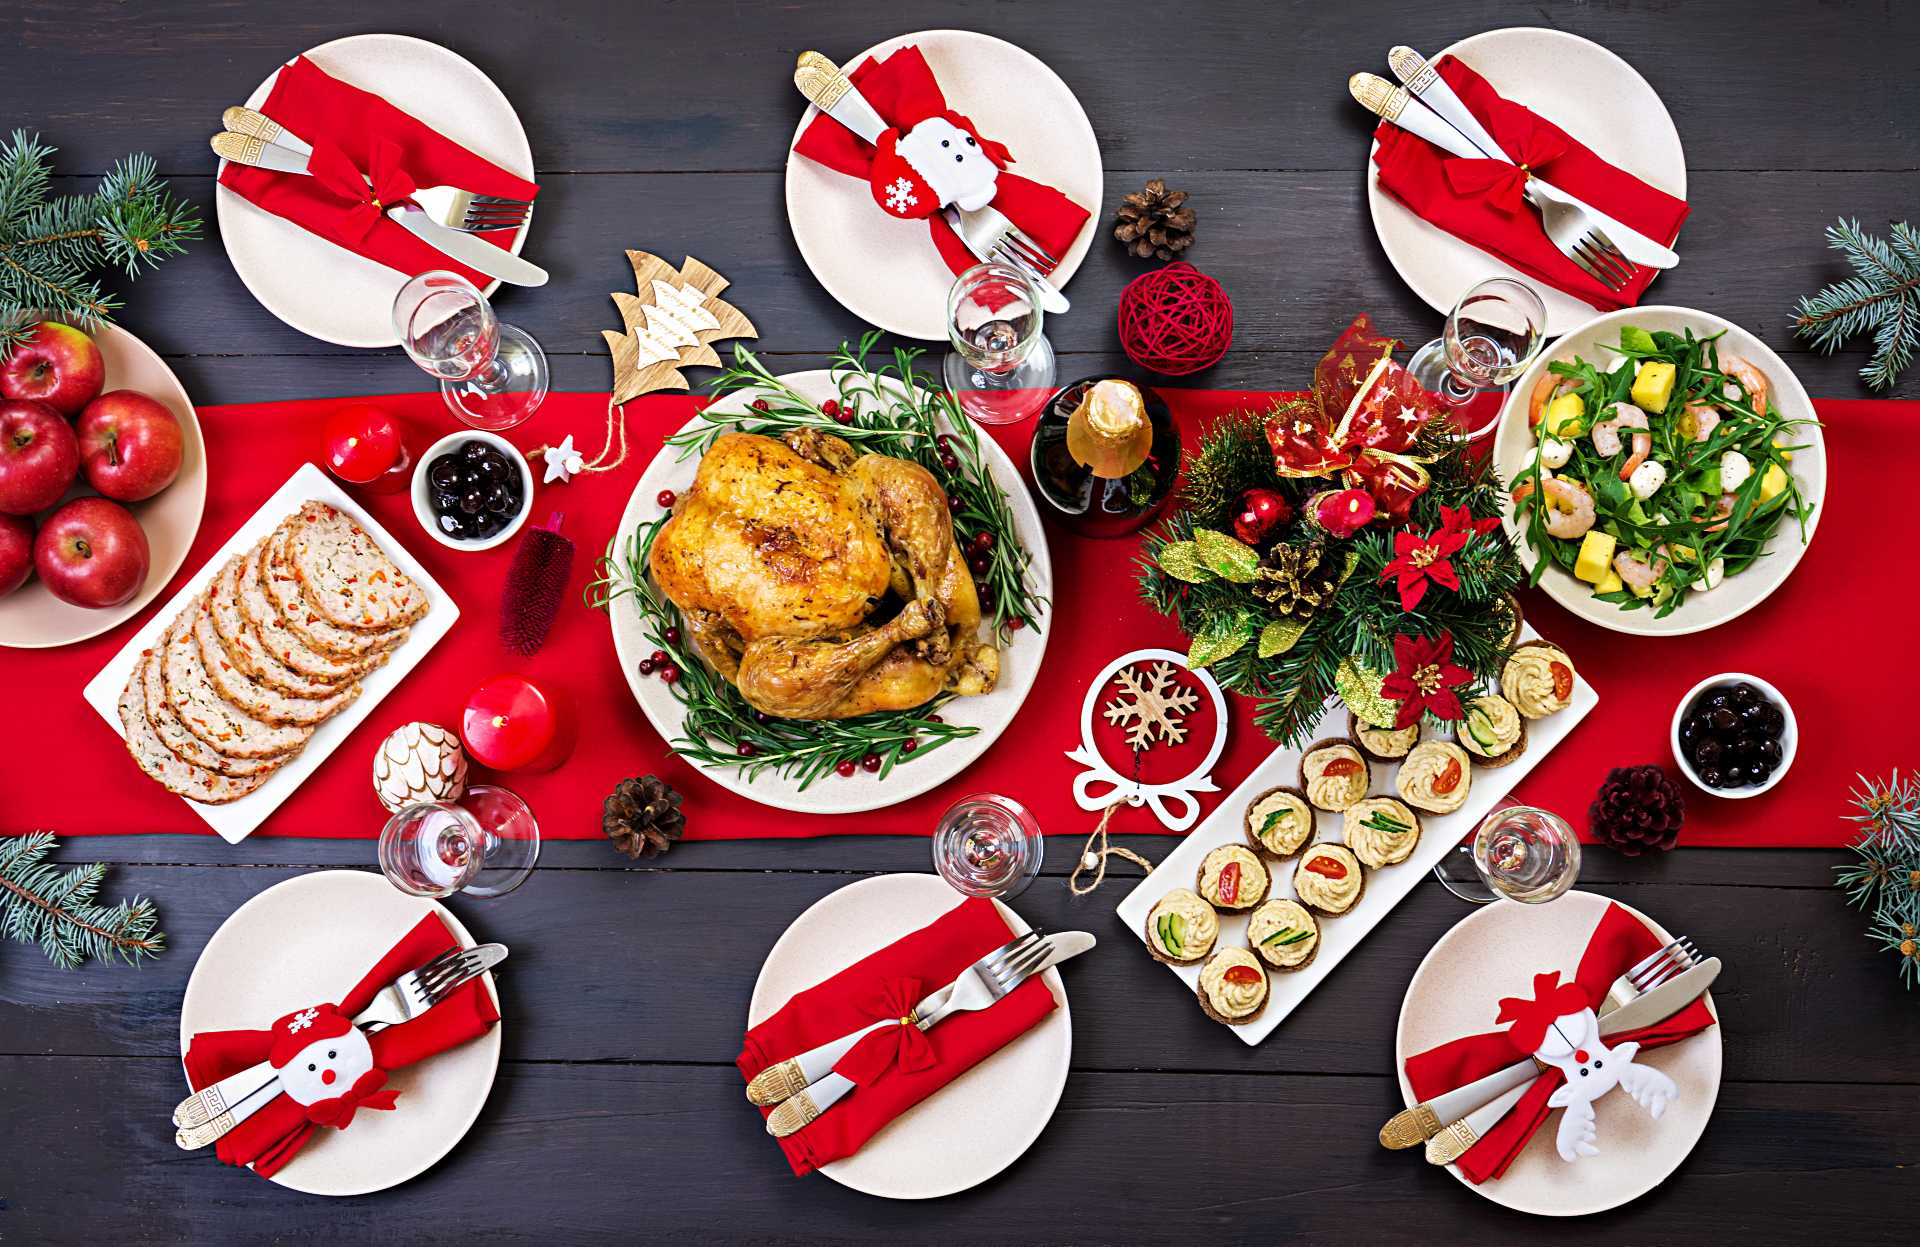 7 Great Tips for Healthier Holiday Eating